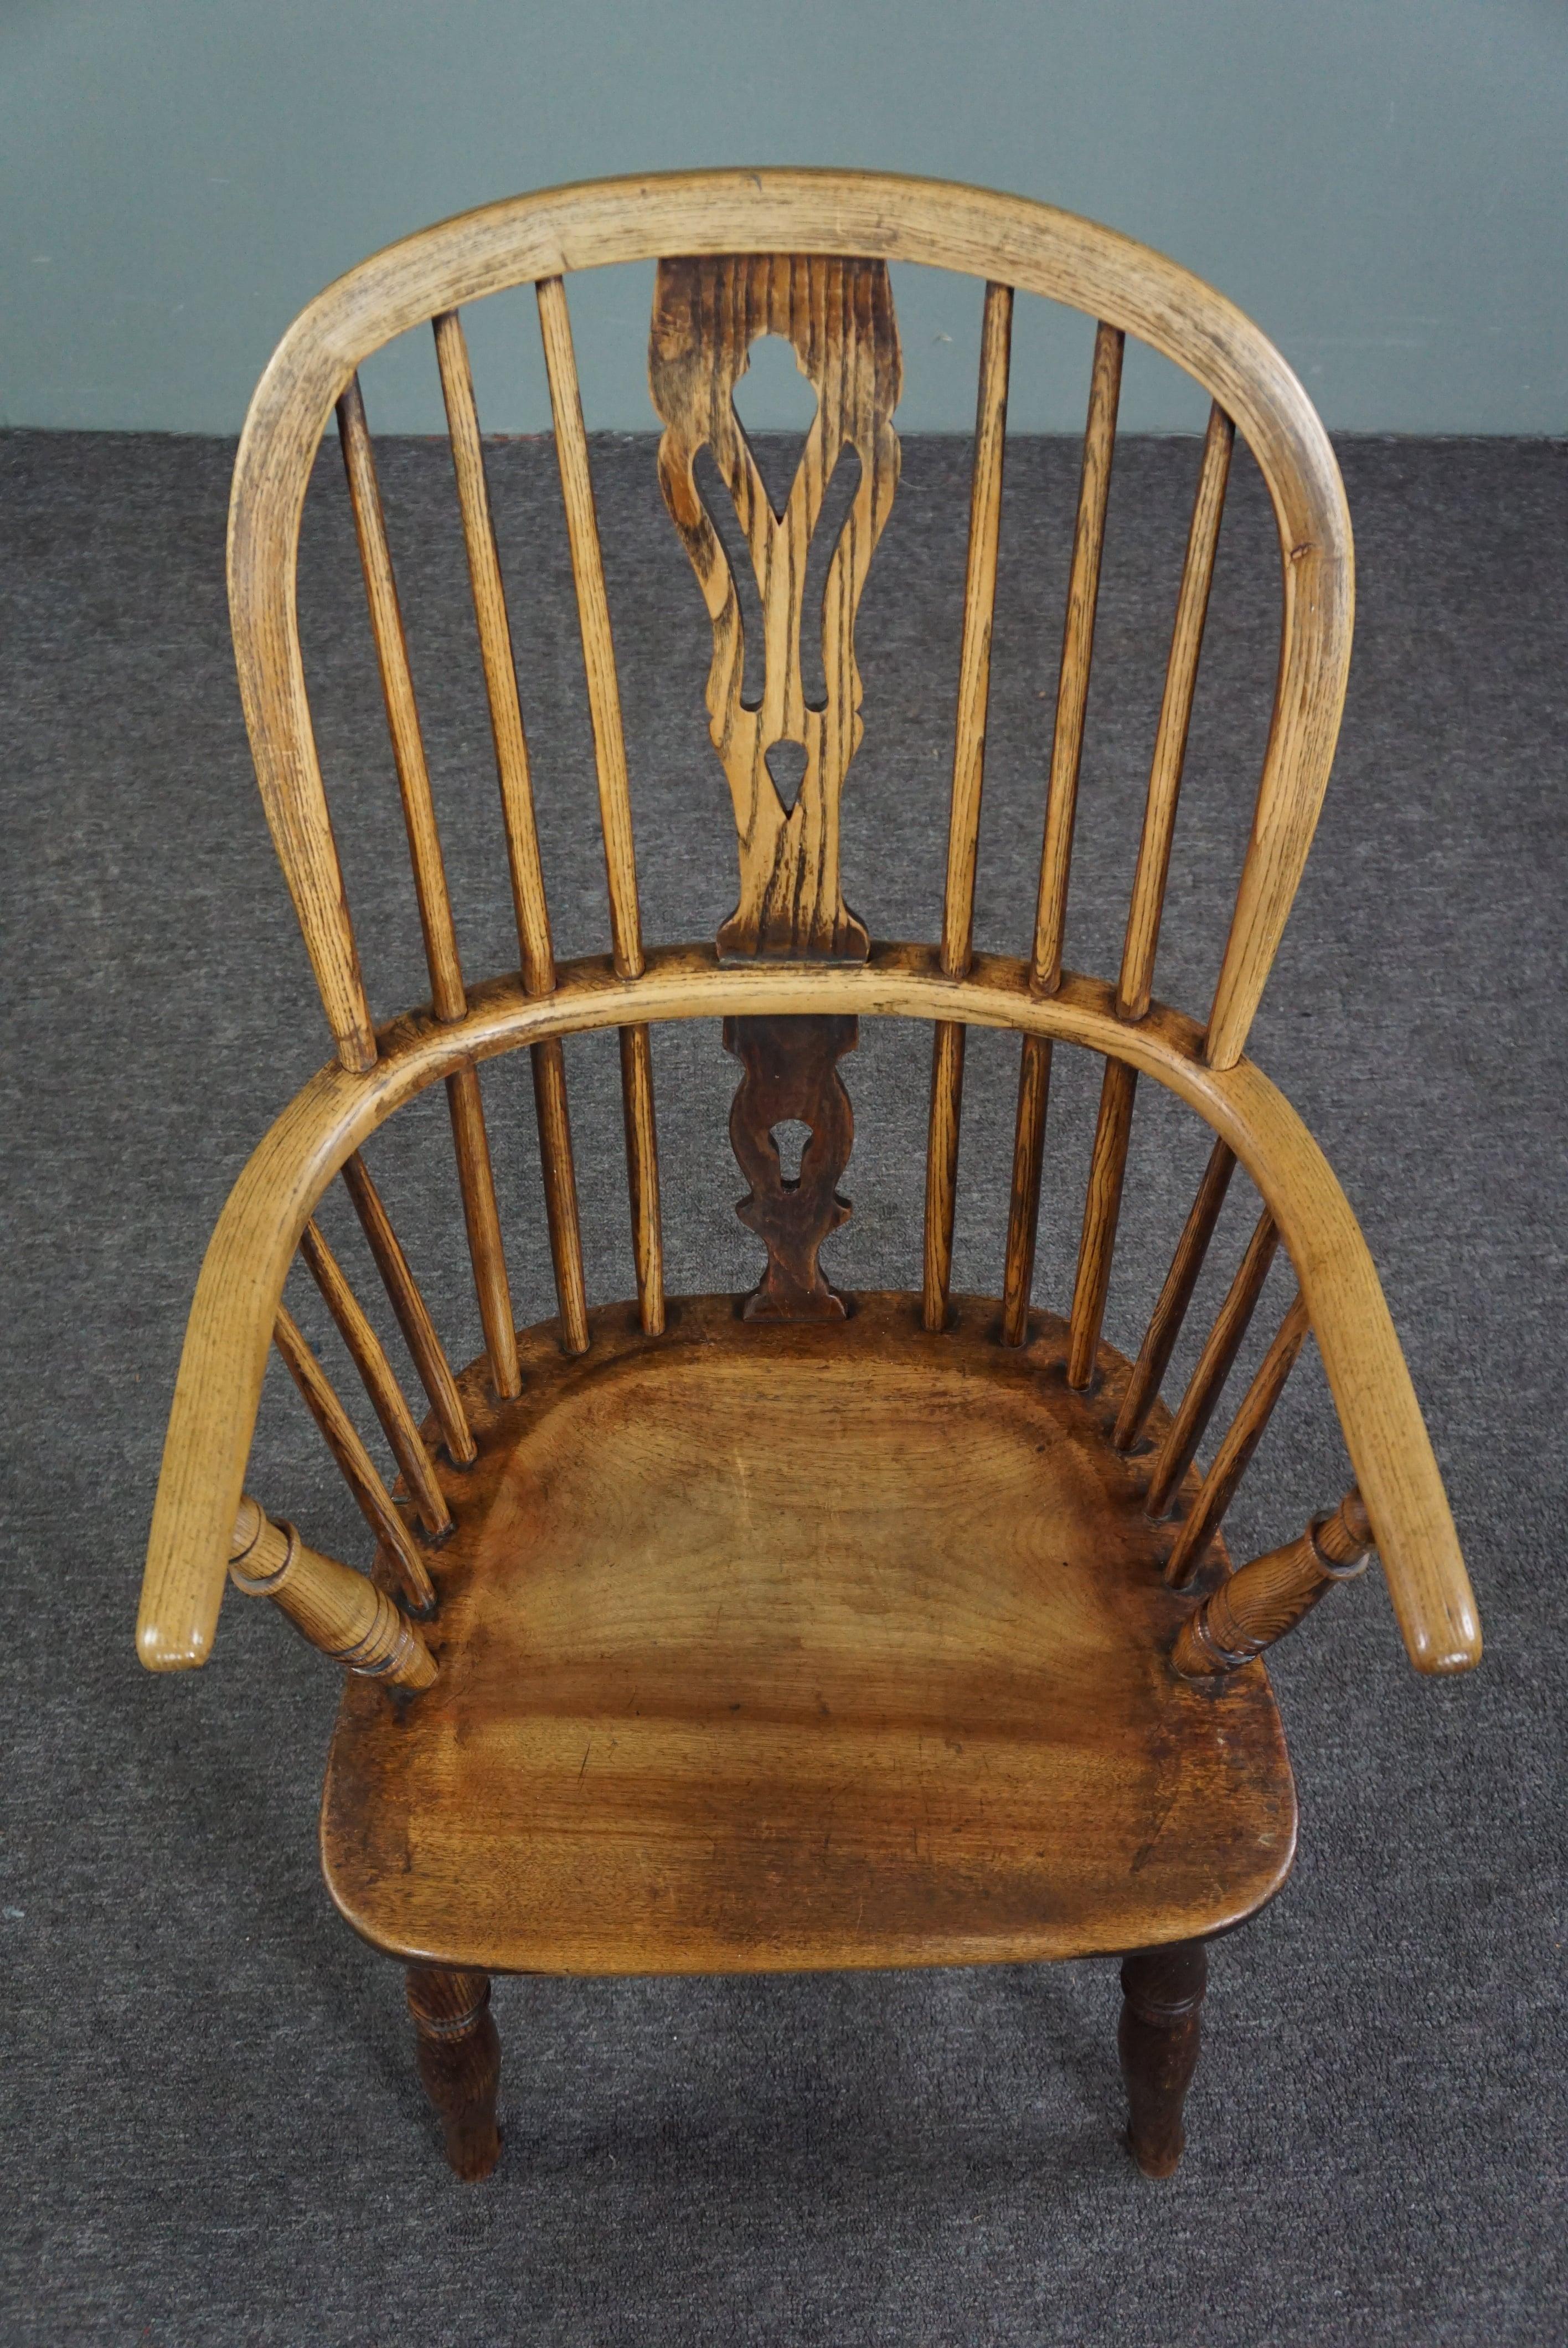 Wood Very charming antique 18th century English Windsor chair/armchair For Sale